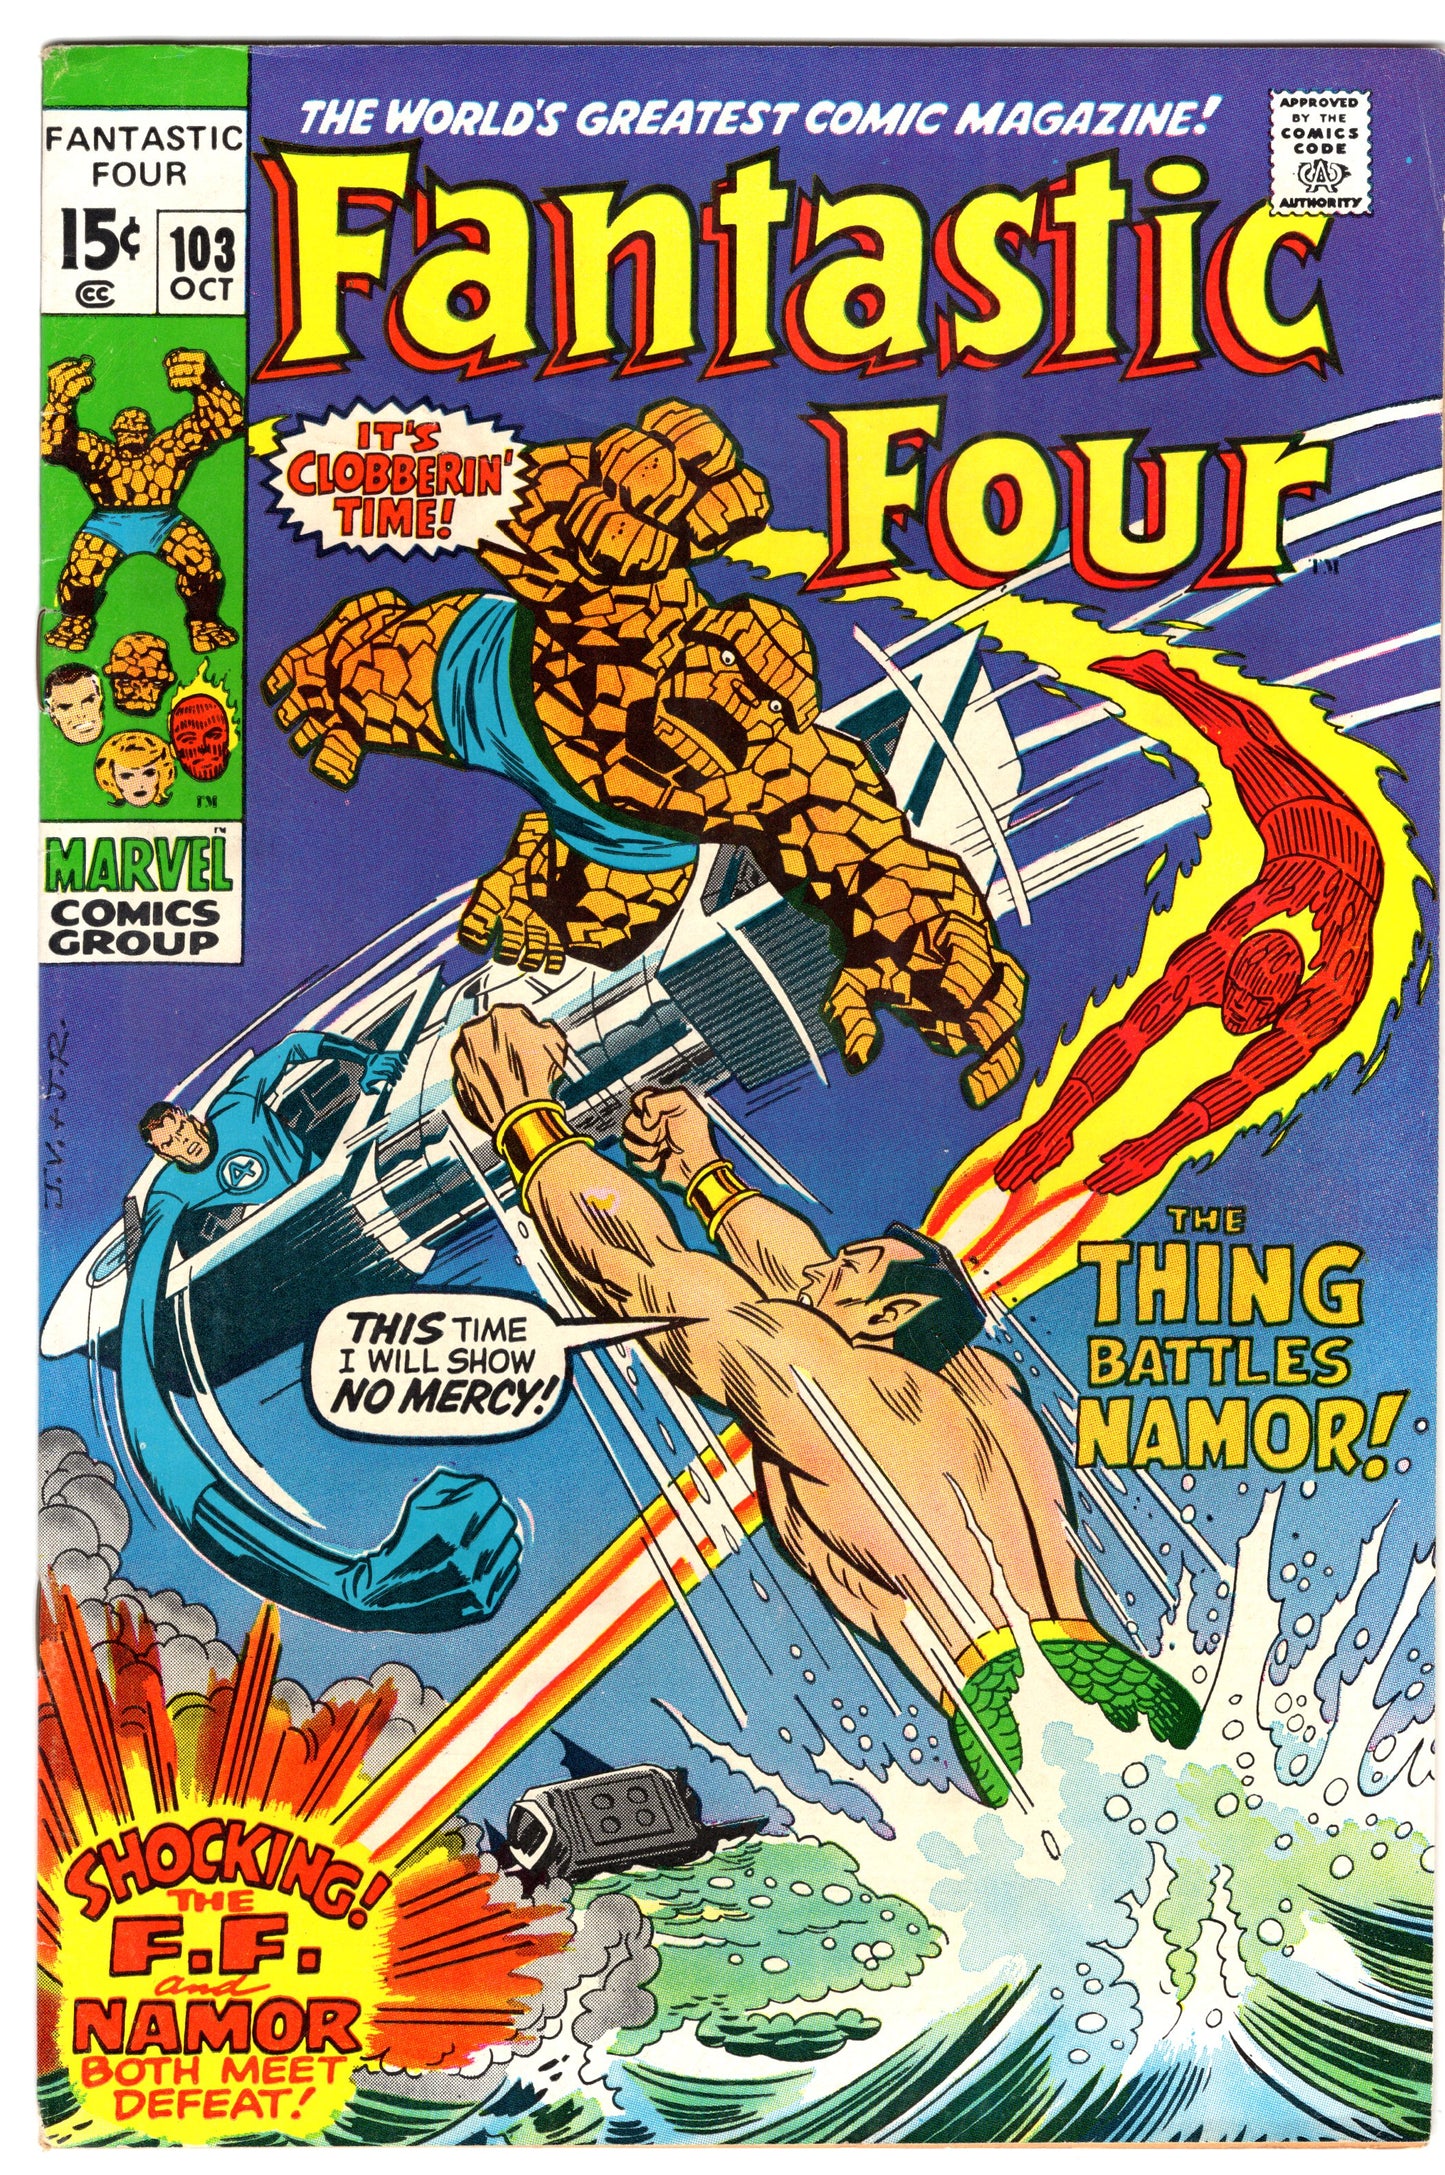 Fantastic Four - Issue #103 "The Thing Battles Nomar!" (Oct. 1970 - Marvel Comics) VG+